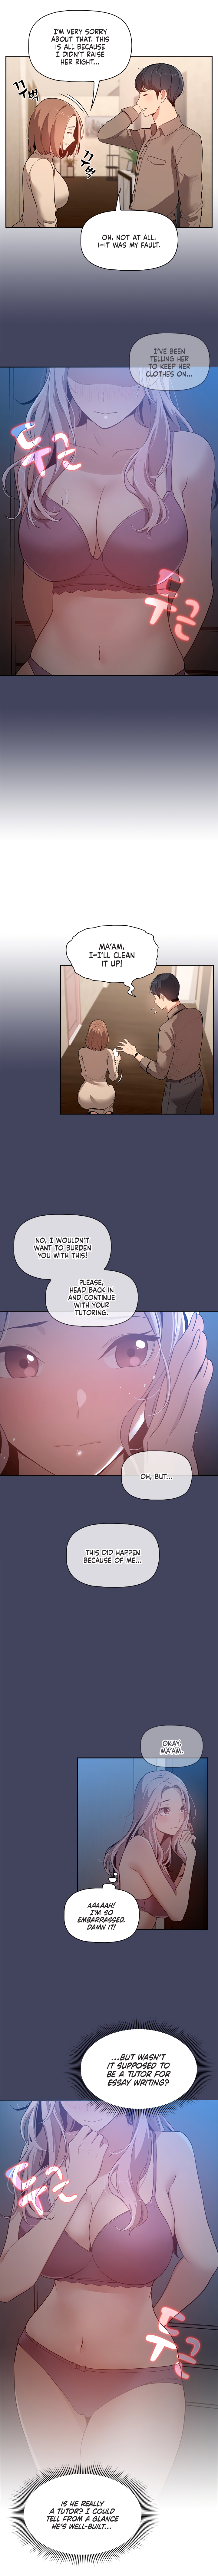 Private Tutoring in These Trying Times - Chapter 2 Page 5